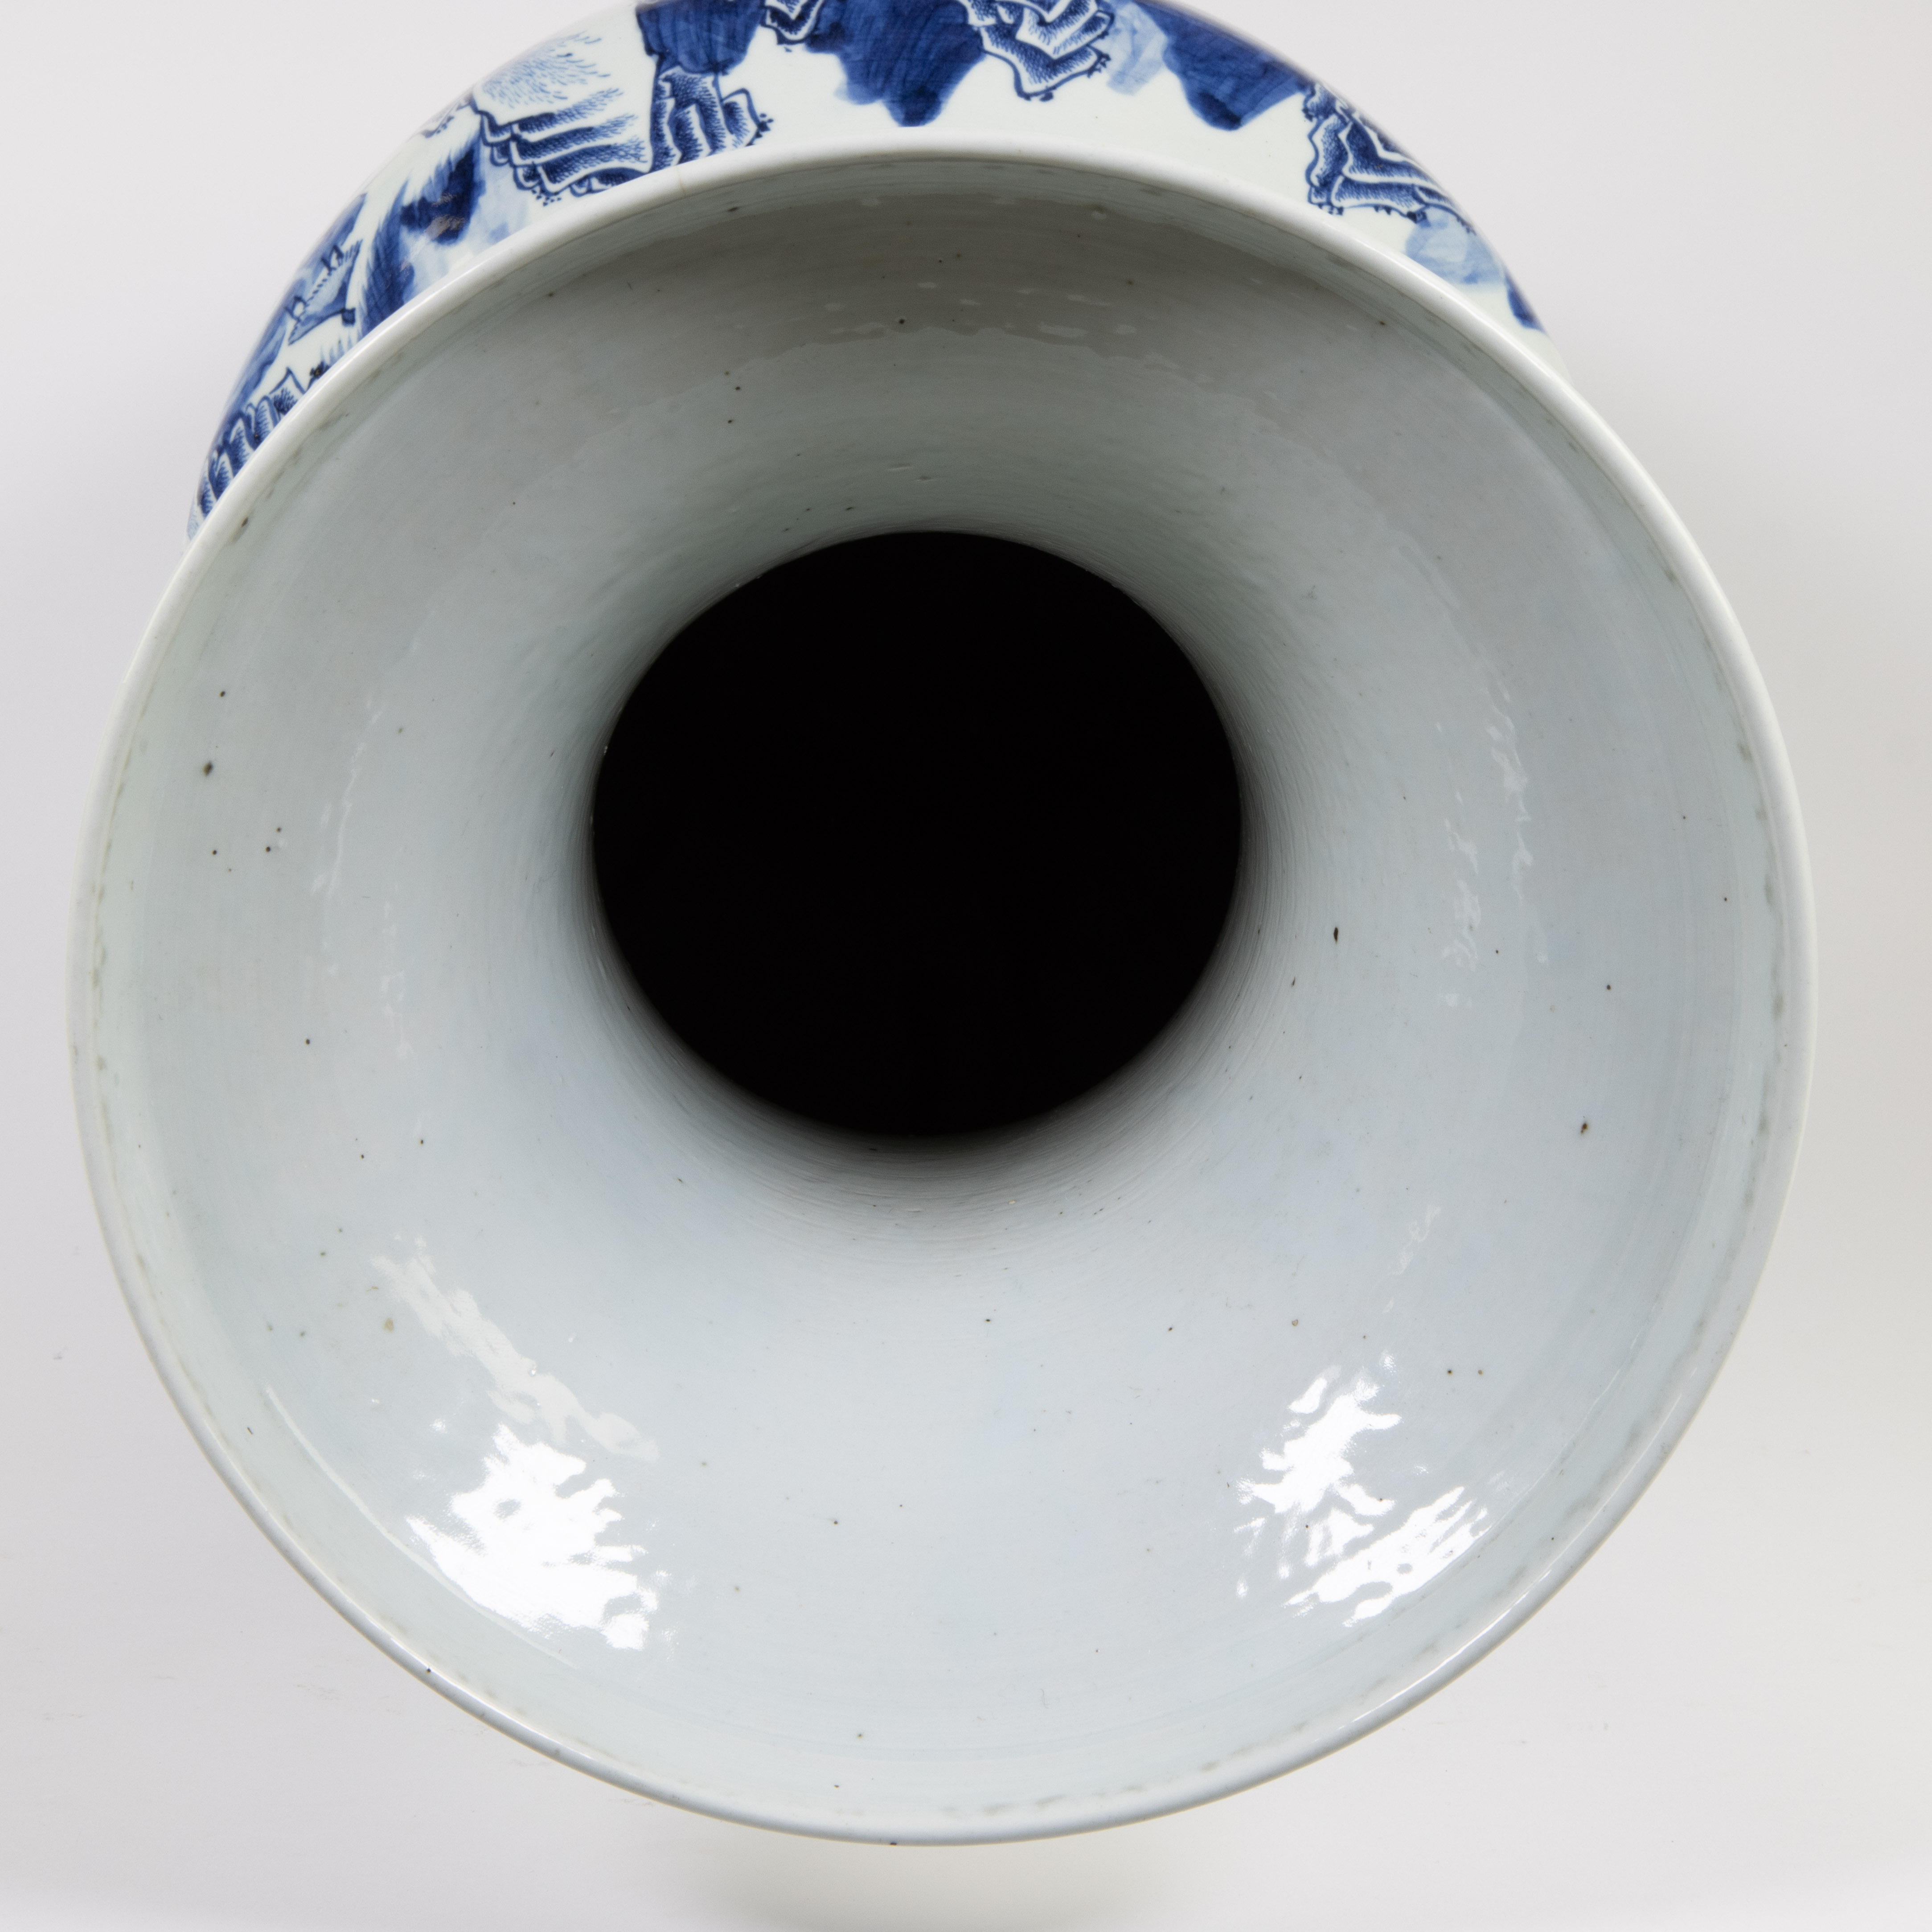 Large Chinese vase blue/white with floral mountain decor, late 19th century - Image 6 of 8